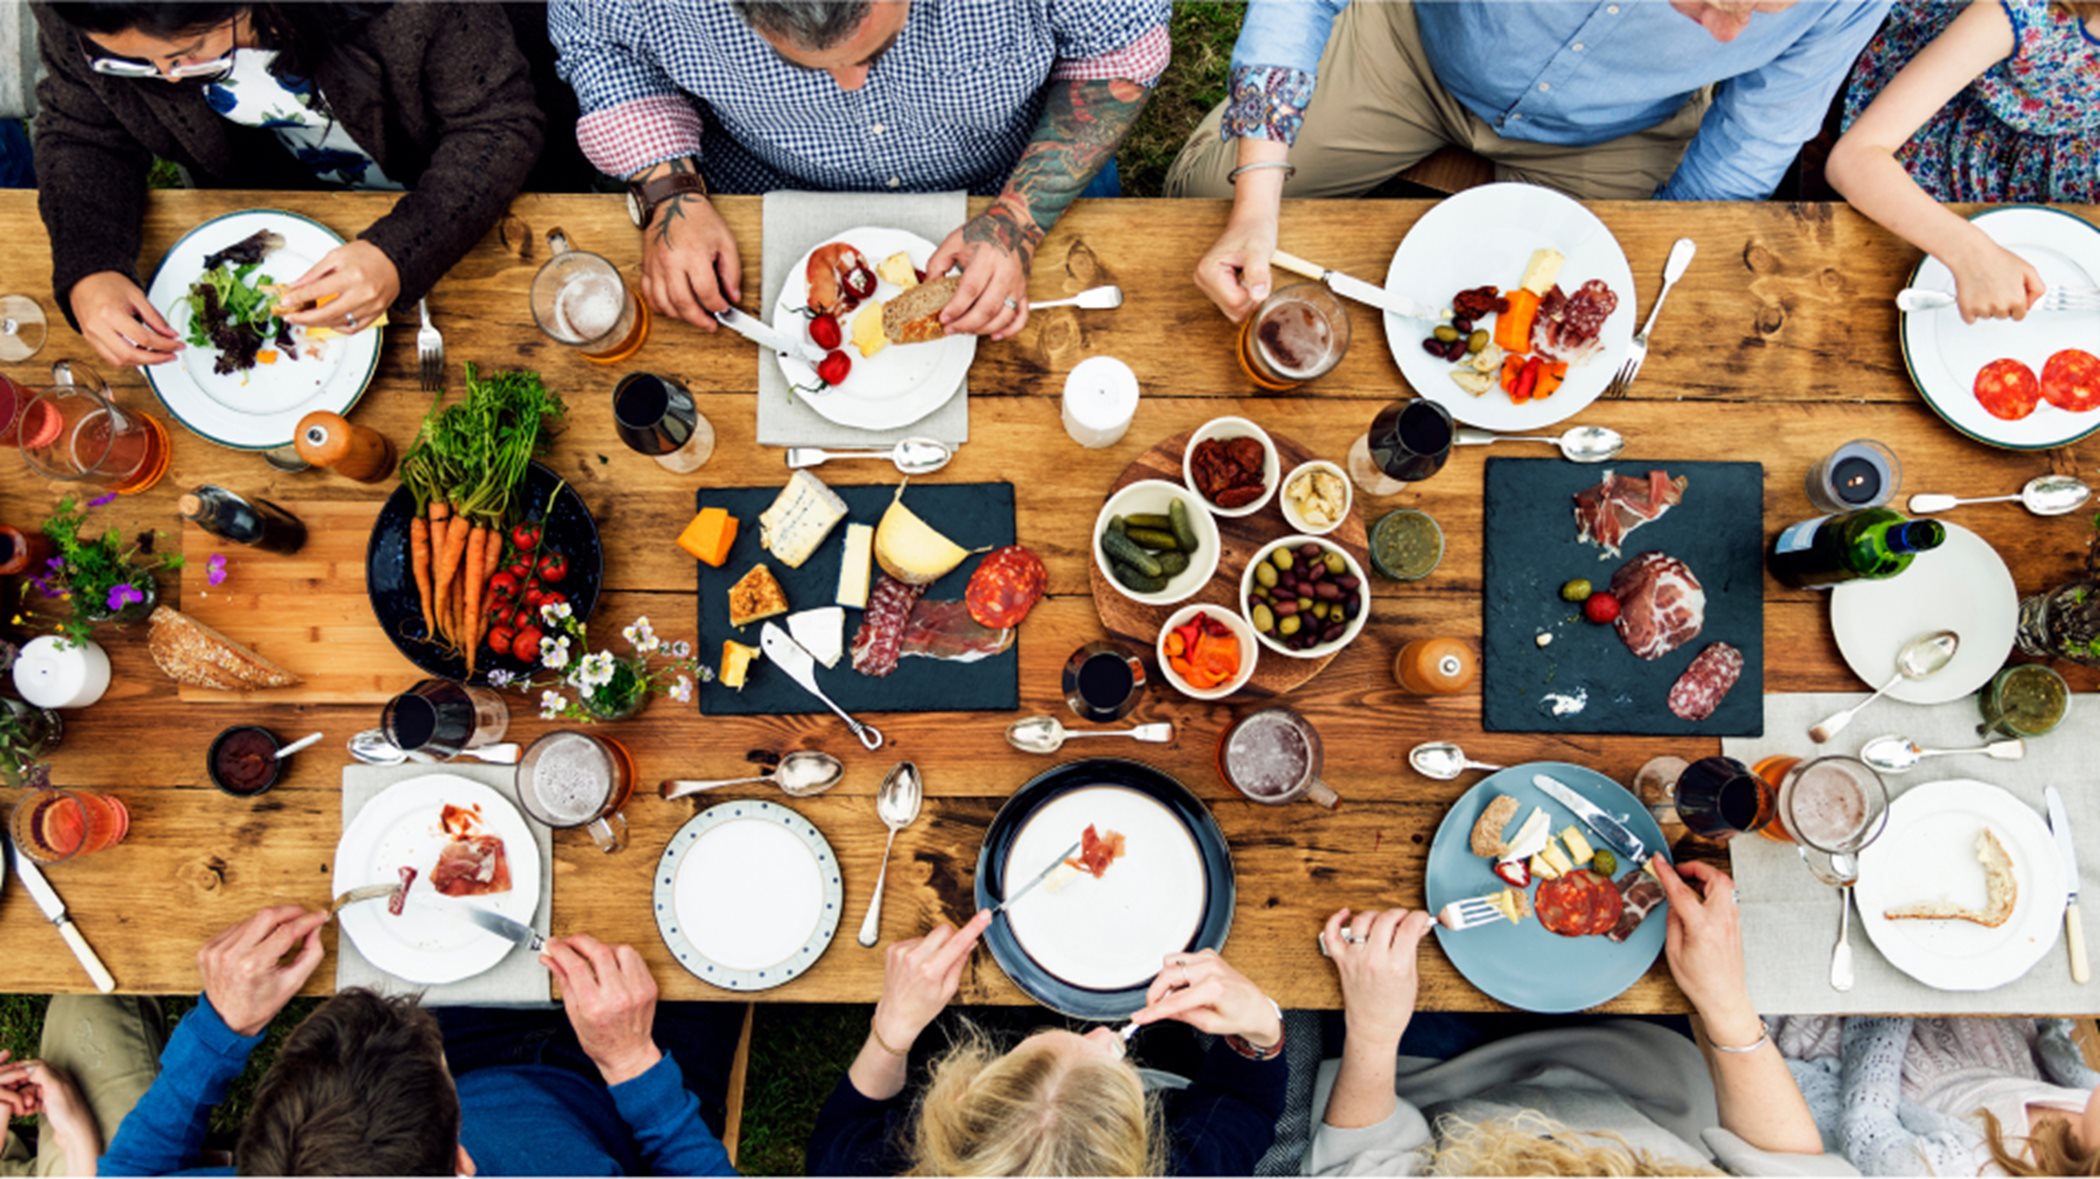 Overhead view of people enjoying a potluck style meal at a wooden table